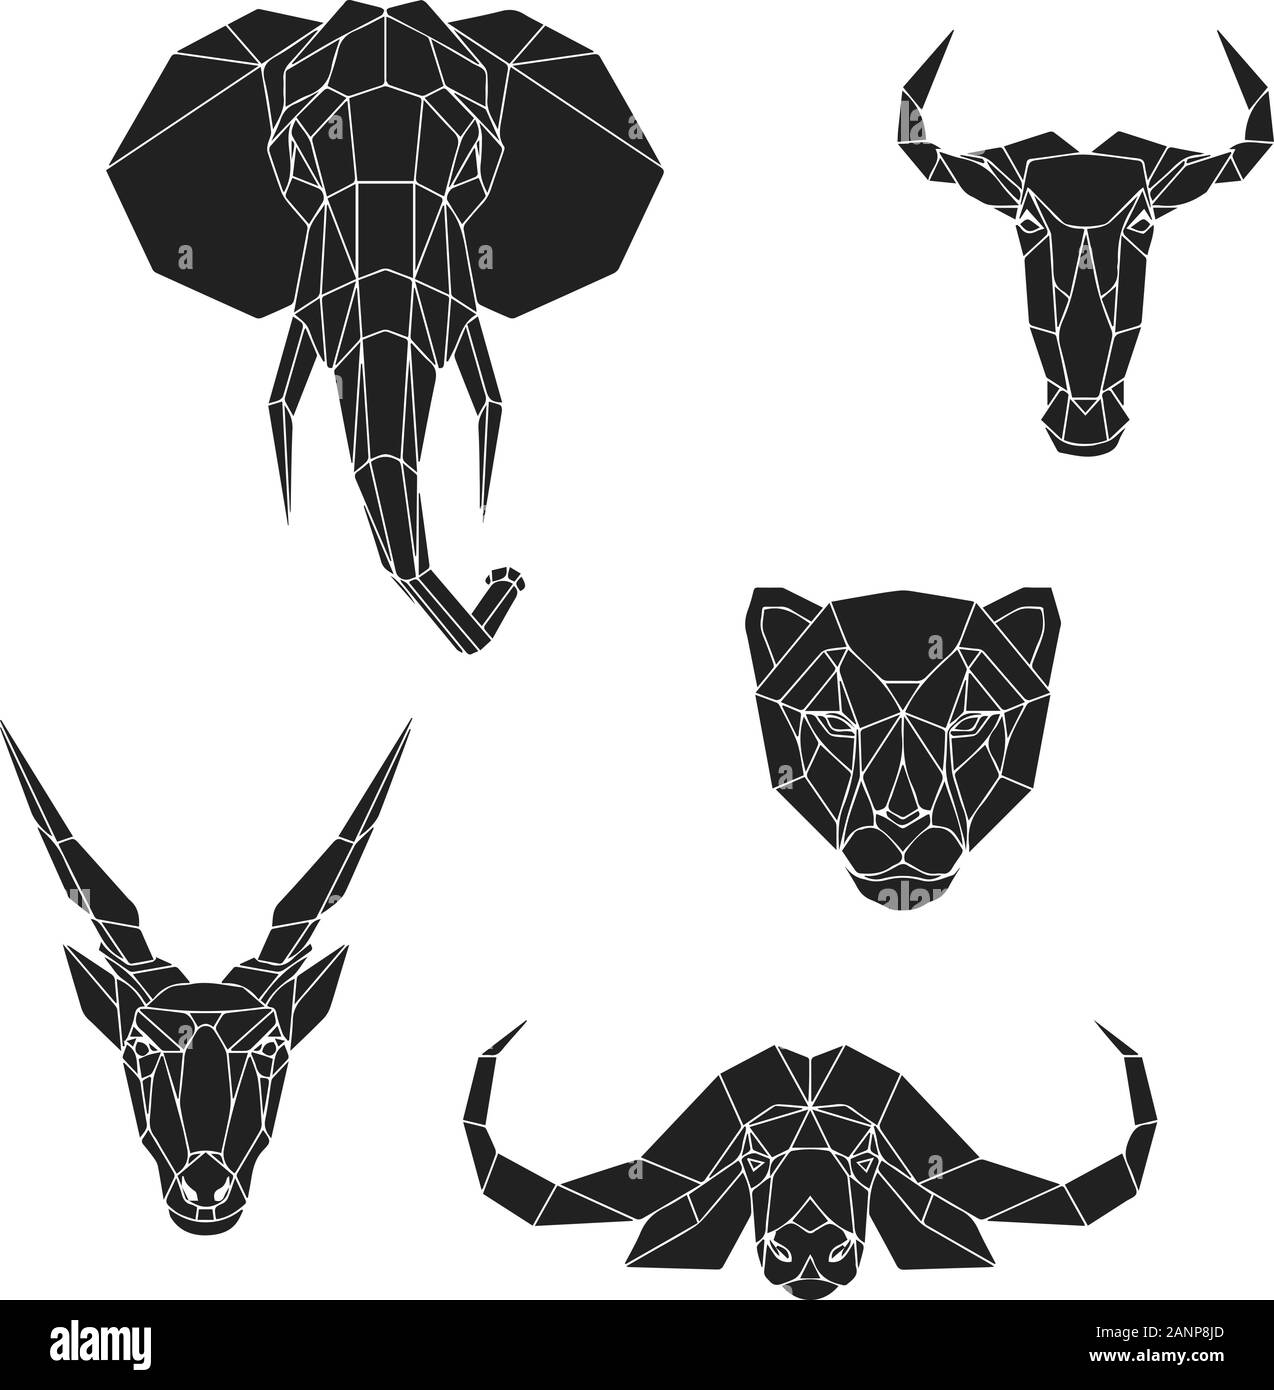 The black geometric heads of elephant, blue wildebeest, cheetah, eland antelope and cape buffalo. Set polygonal abstract animals of Africa. Vector ill Stock Vector